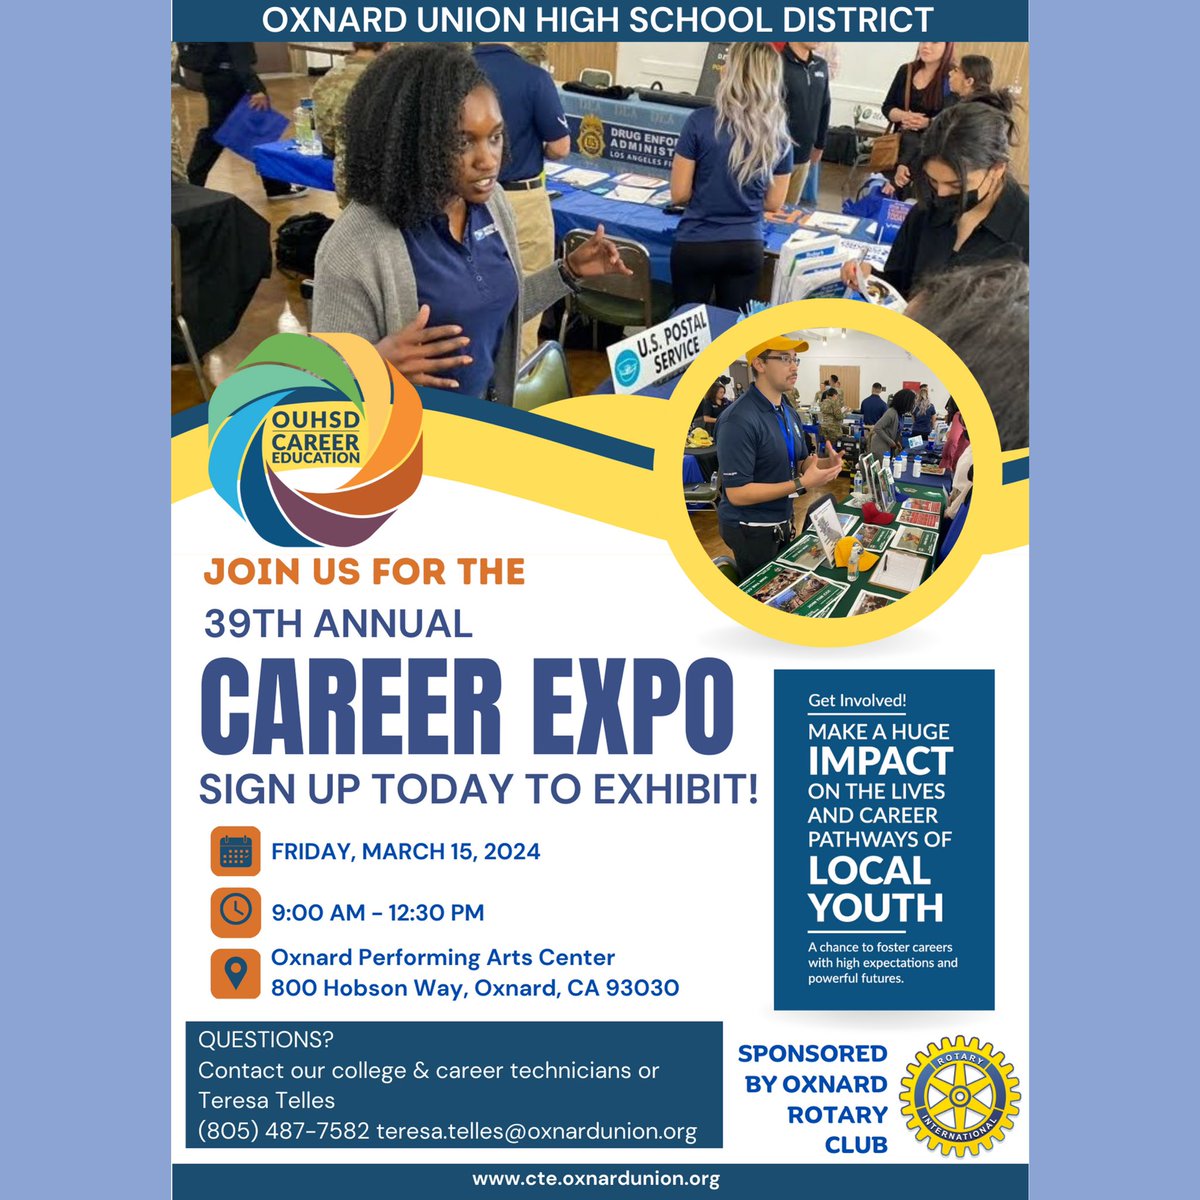 Attention youth employers, youth organizations, trade schools and more! Sign up today for a booth at our 39th Annual Career Expo! This event is FREE and will have over 600 Junior & Senior students from all of @oxnardunion High schools! Please email or call Teresa Telles